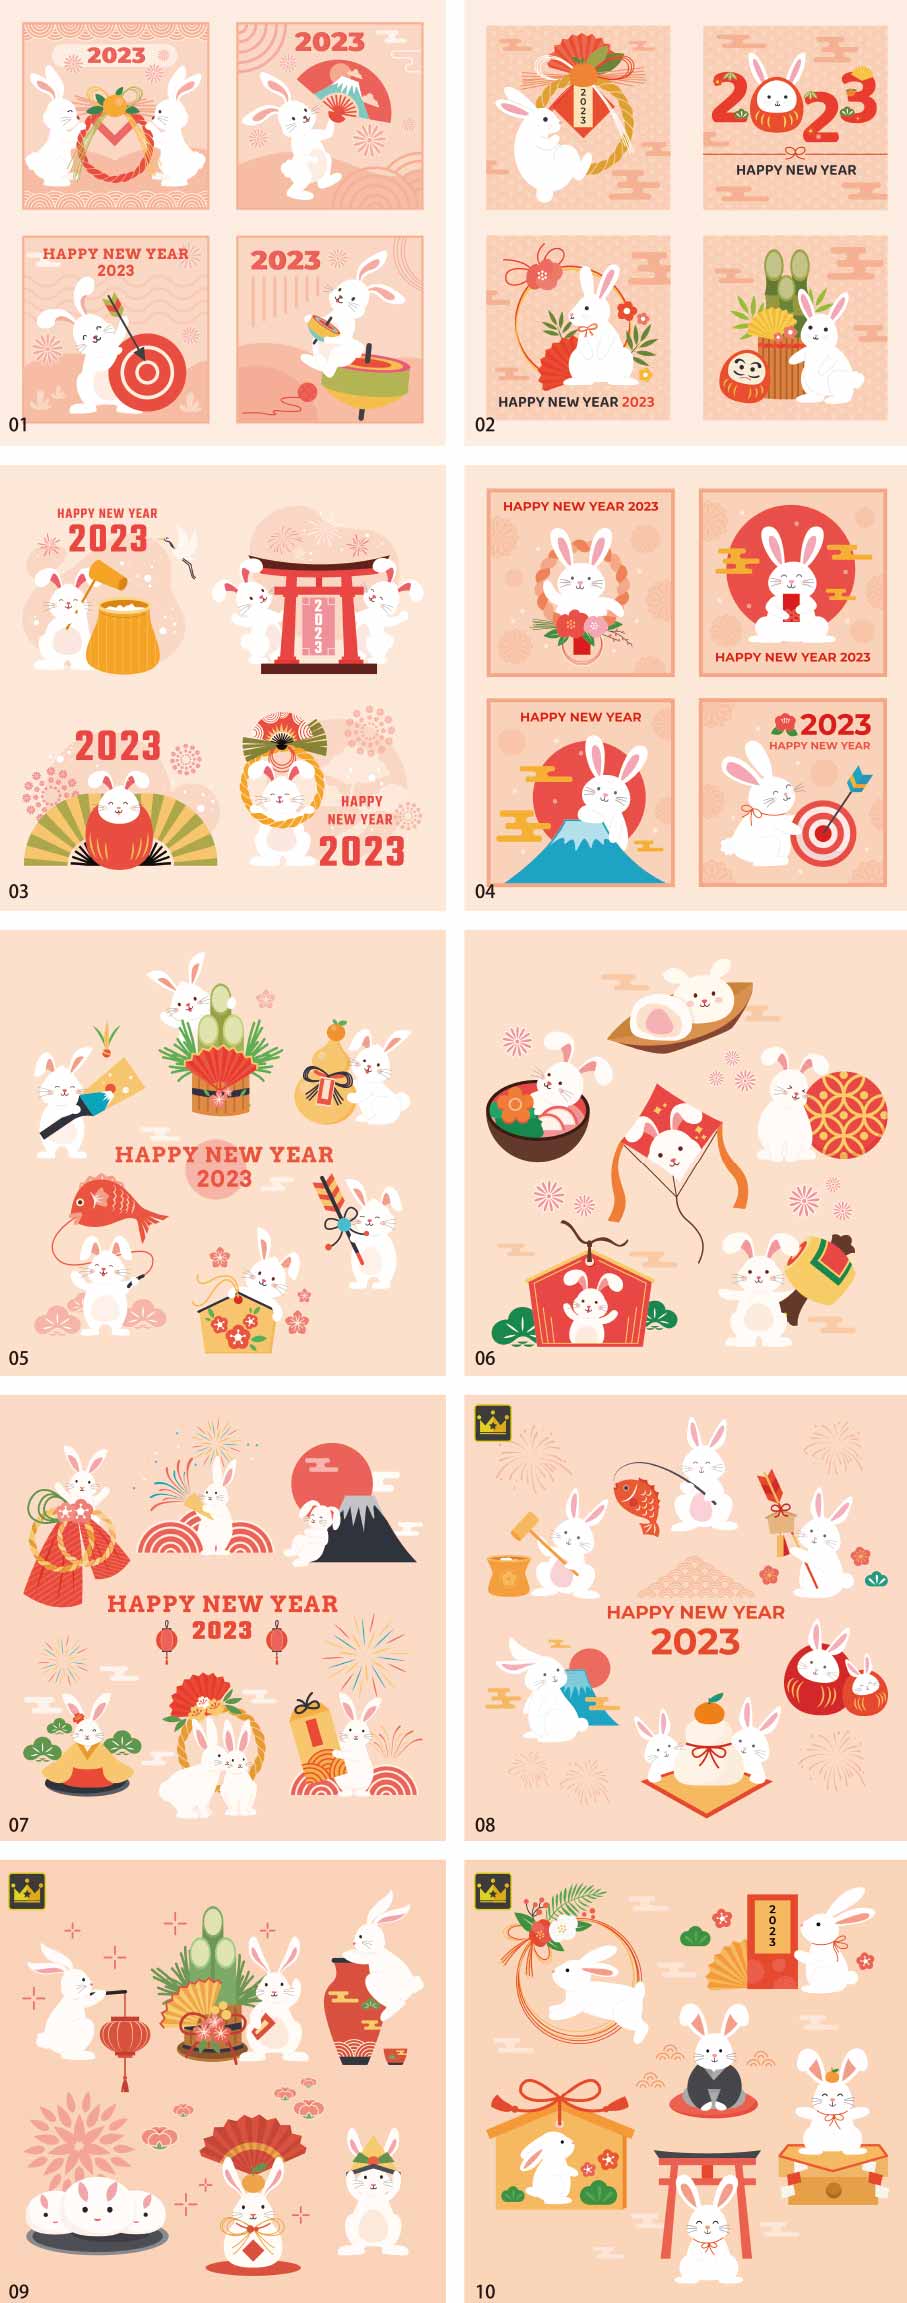 New Year's card illustration collection for the year of the rabbit